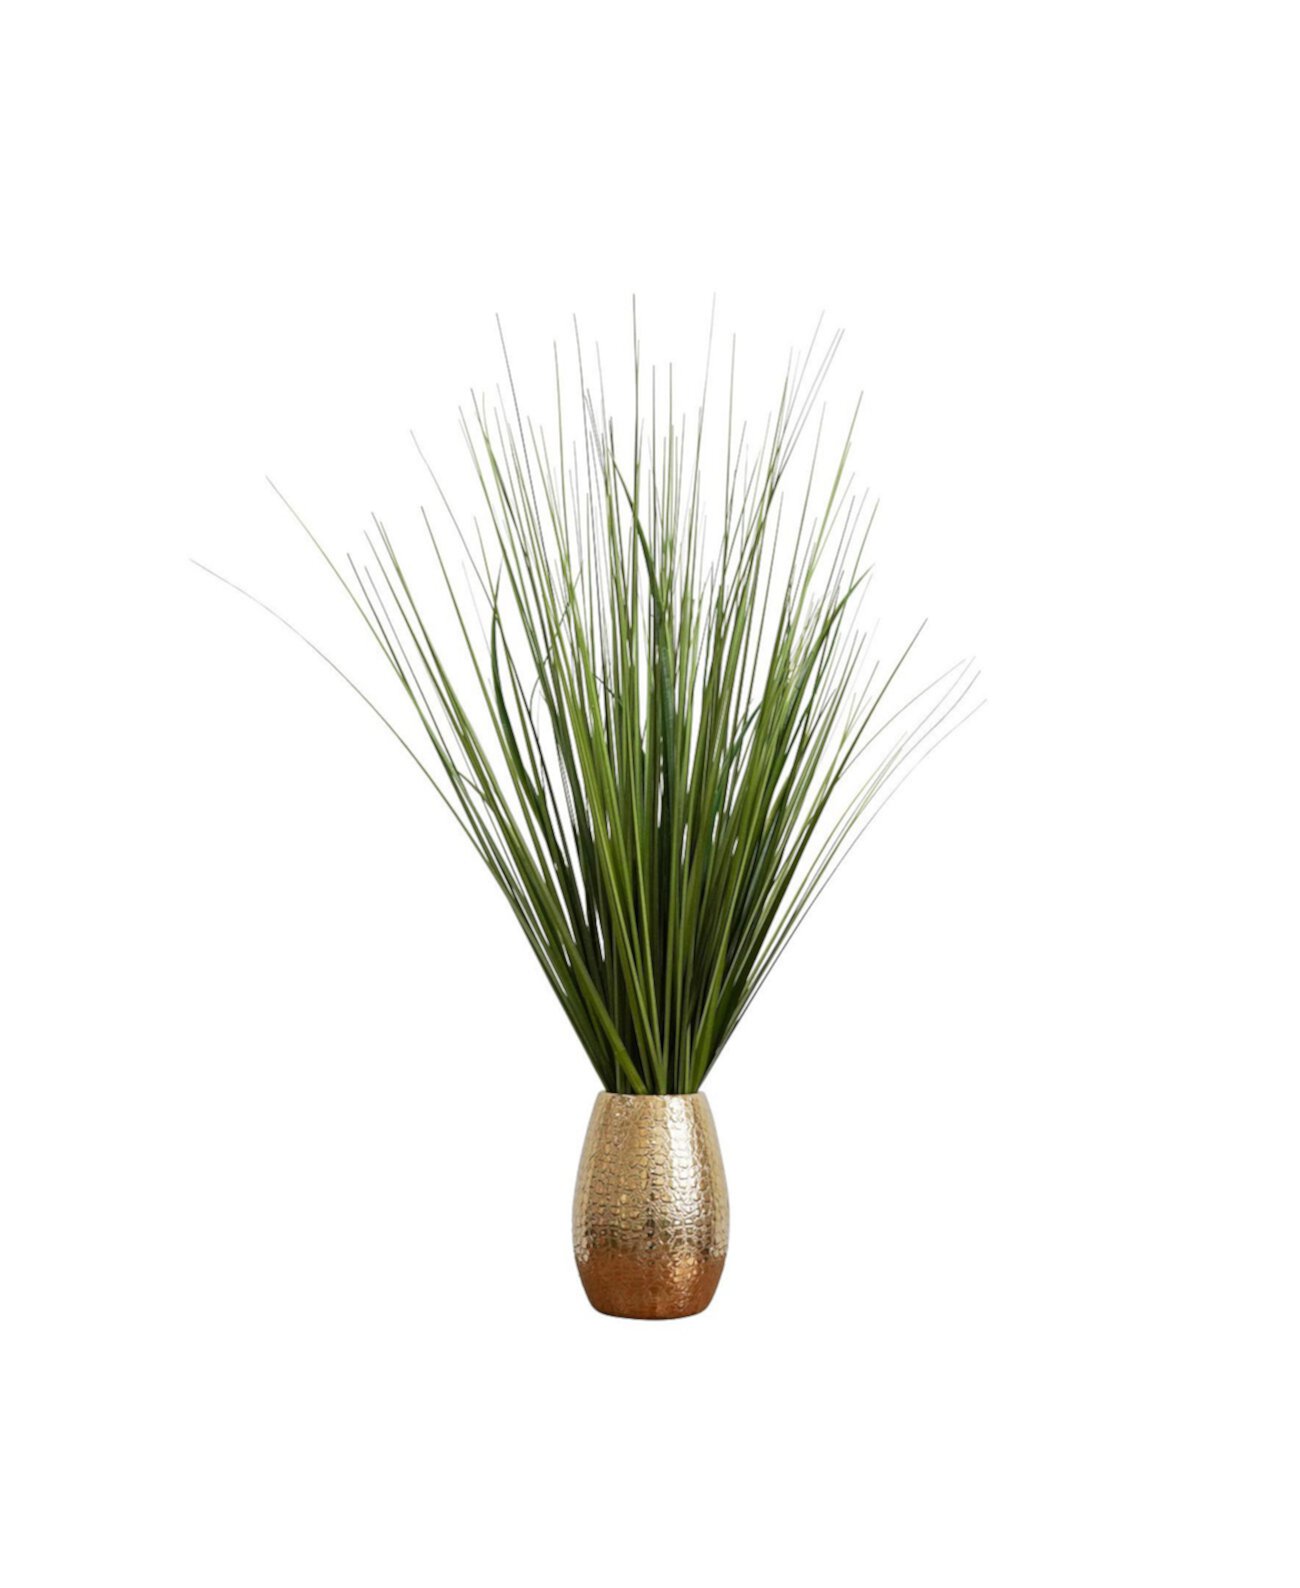 Tabletop Artificial Foliage in Crackled Ceramic Pot, 30" Nature's Elements